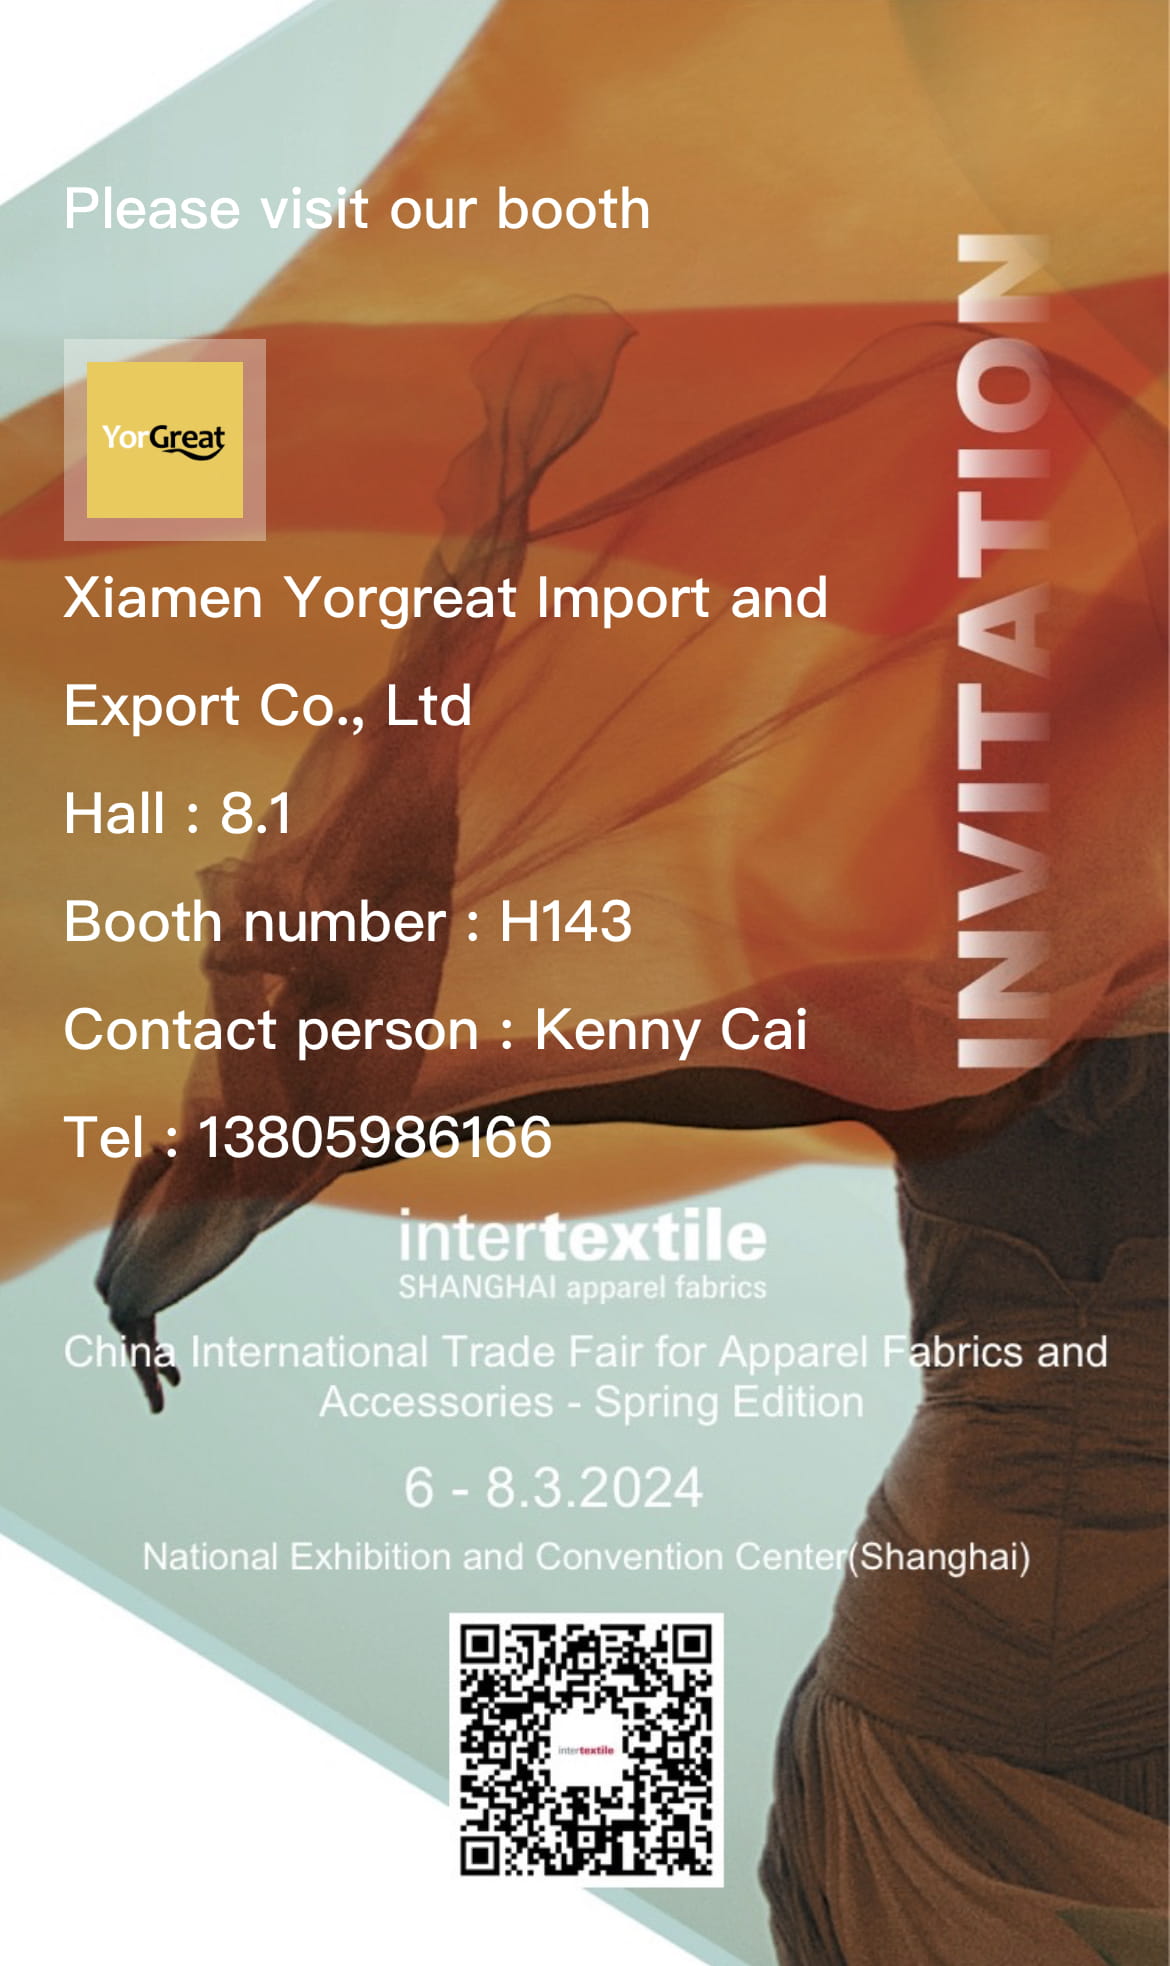 Welcome to visit our booth during the Intertextile SHANGHAI Apparel Fabrics Exhibition in Shanghai